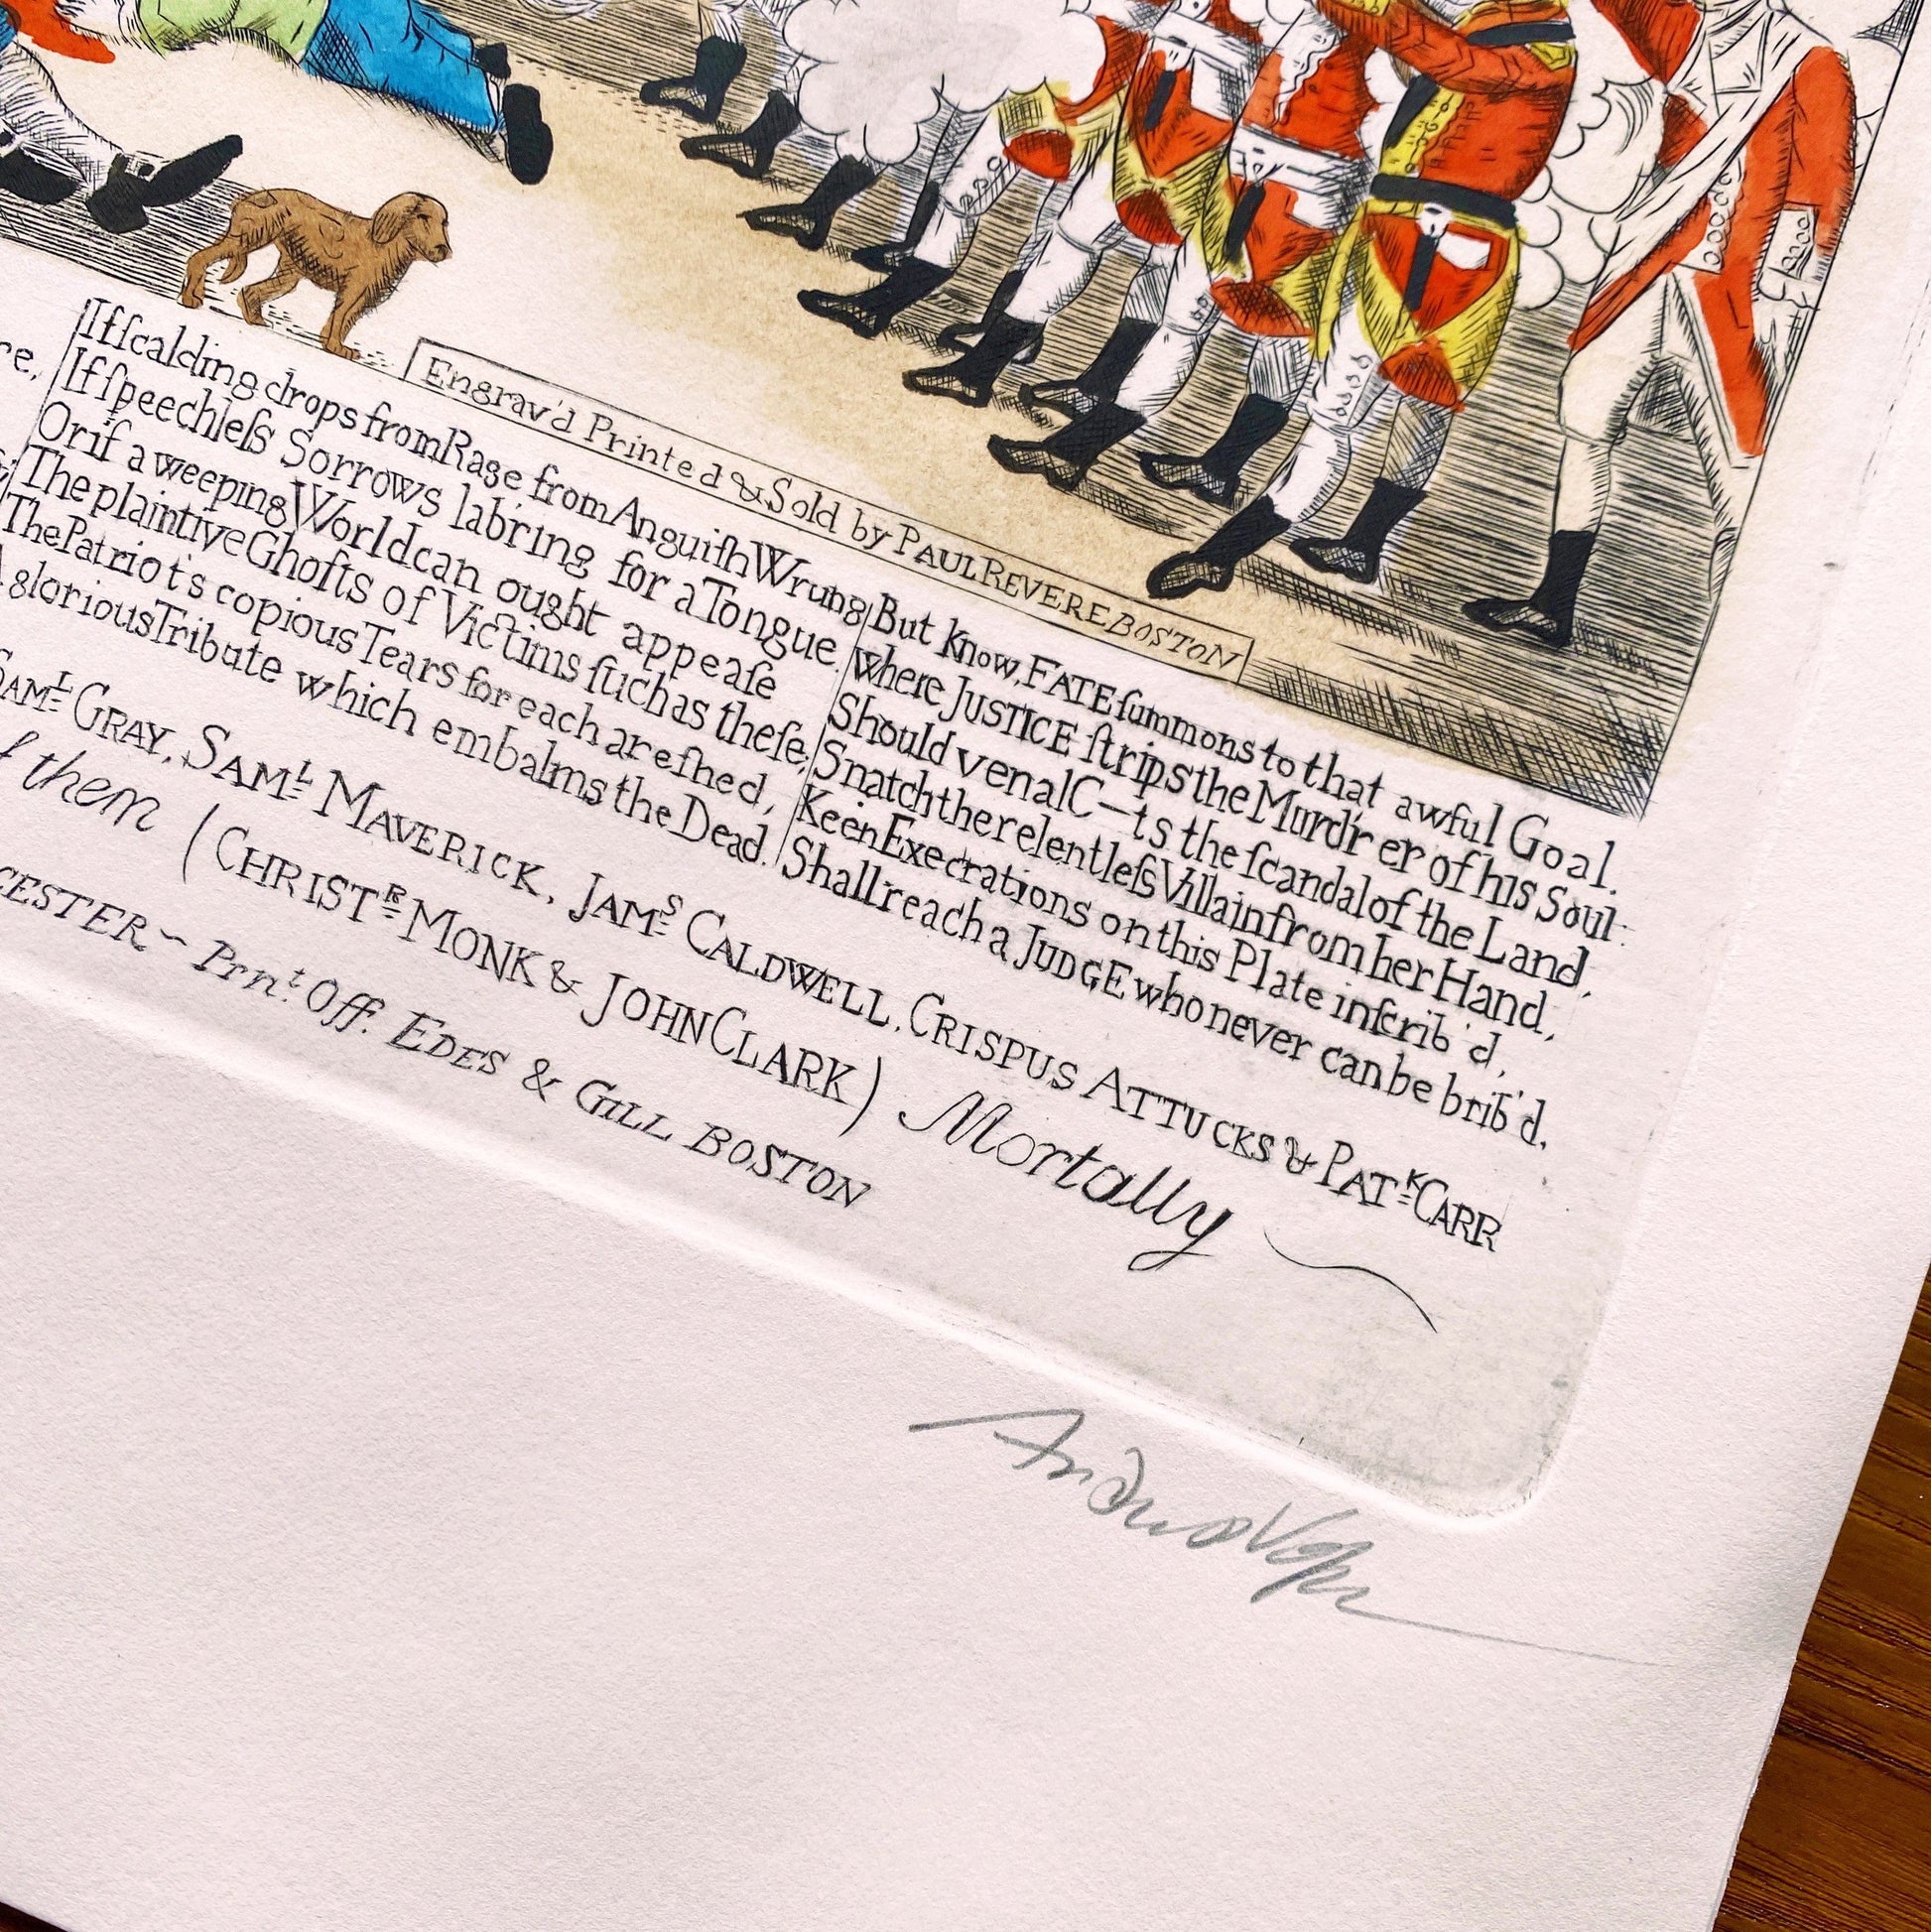 Signed by Andy Volpe Boston Massacre Hand-Engraved print, after Revere 